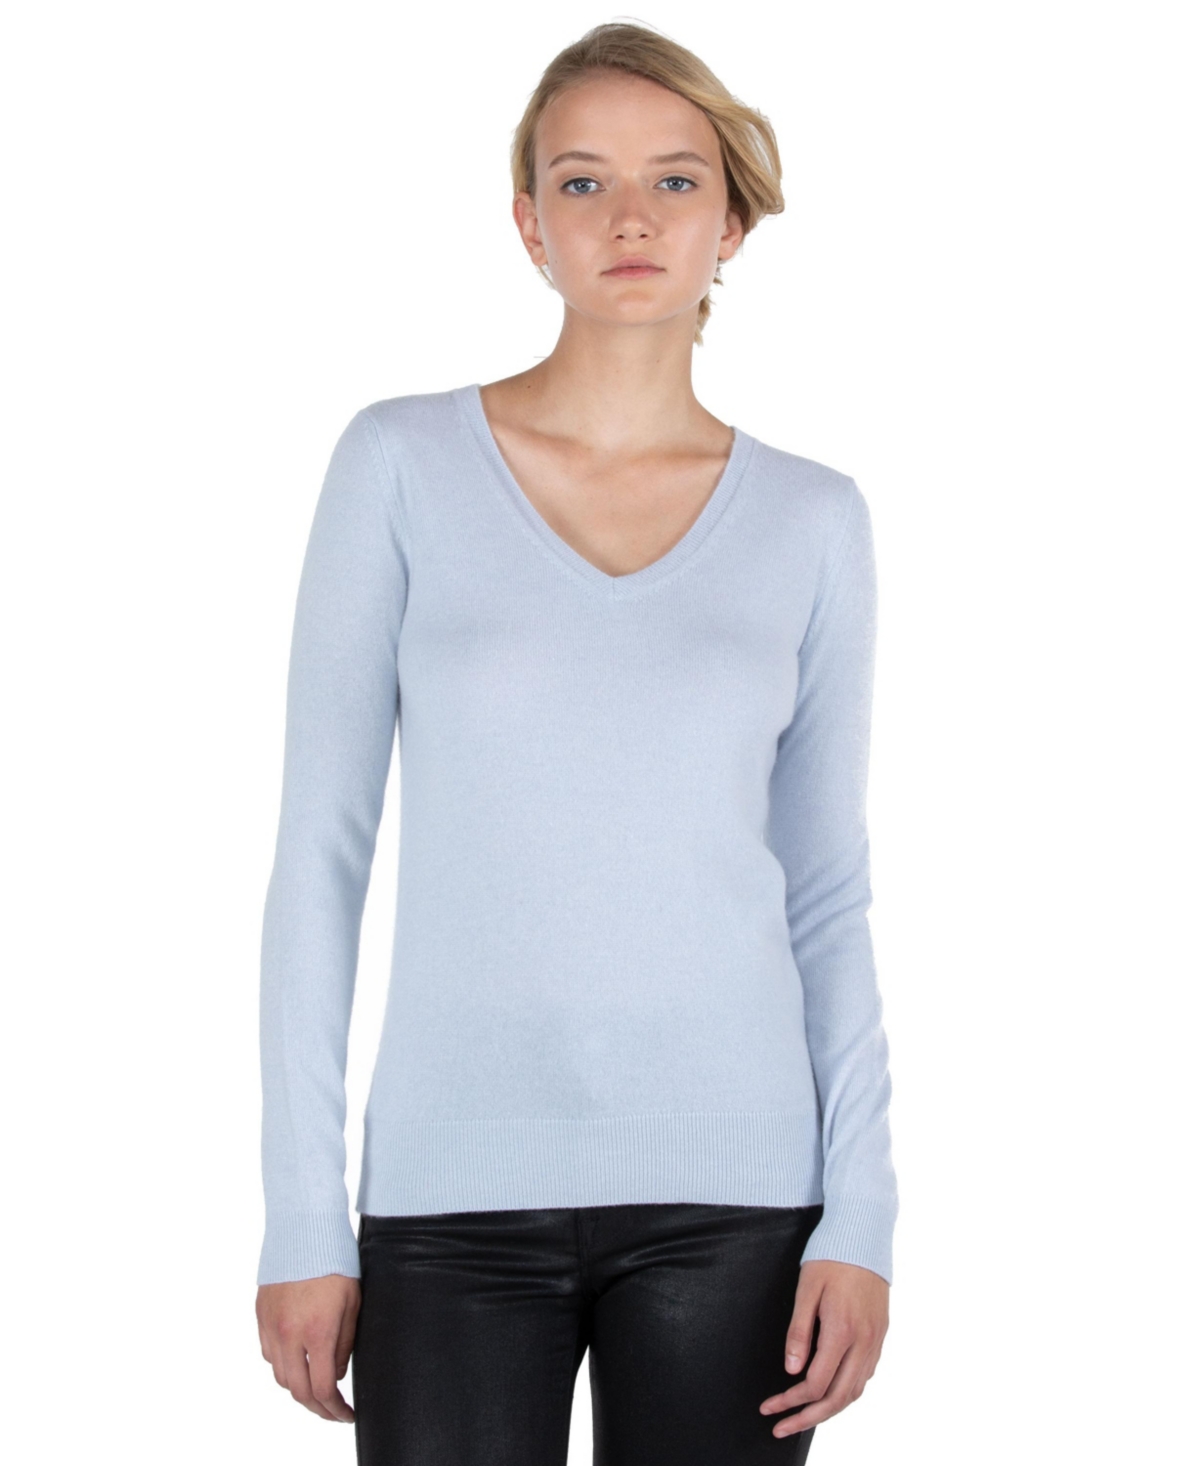 Women's 100% Pure Cashmere Long Sleeve Pullover V Neck Sweater - Toffee